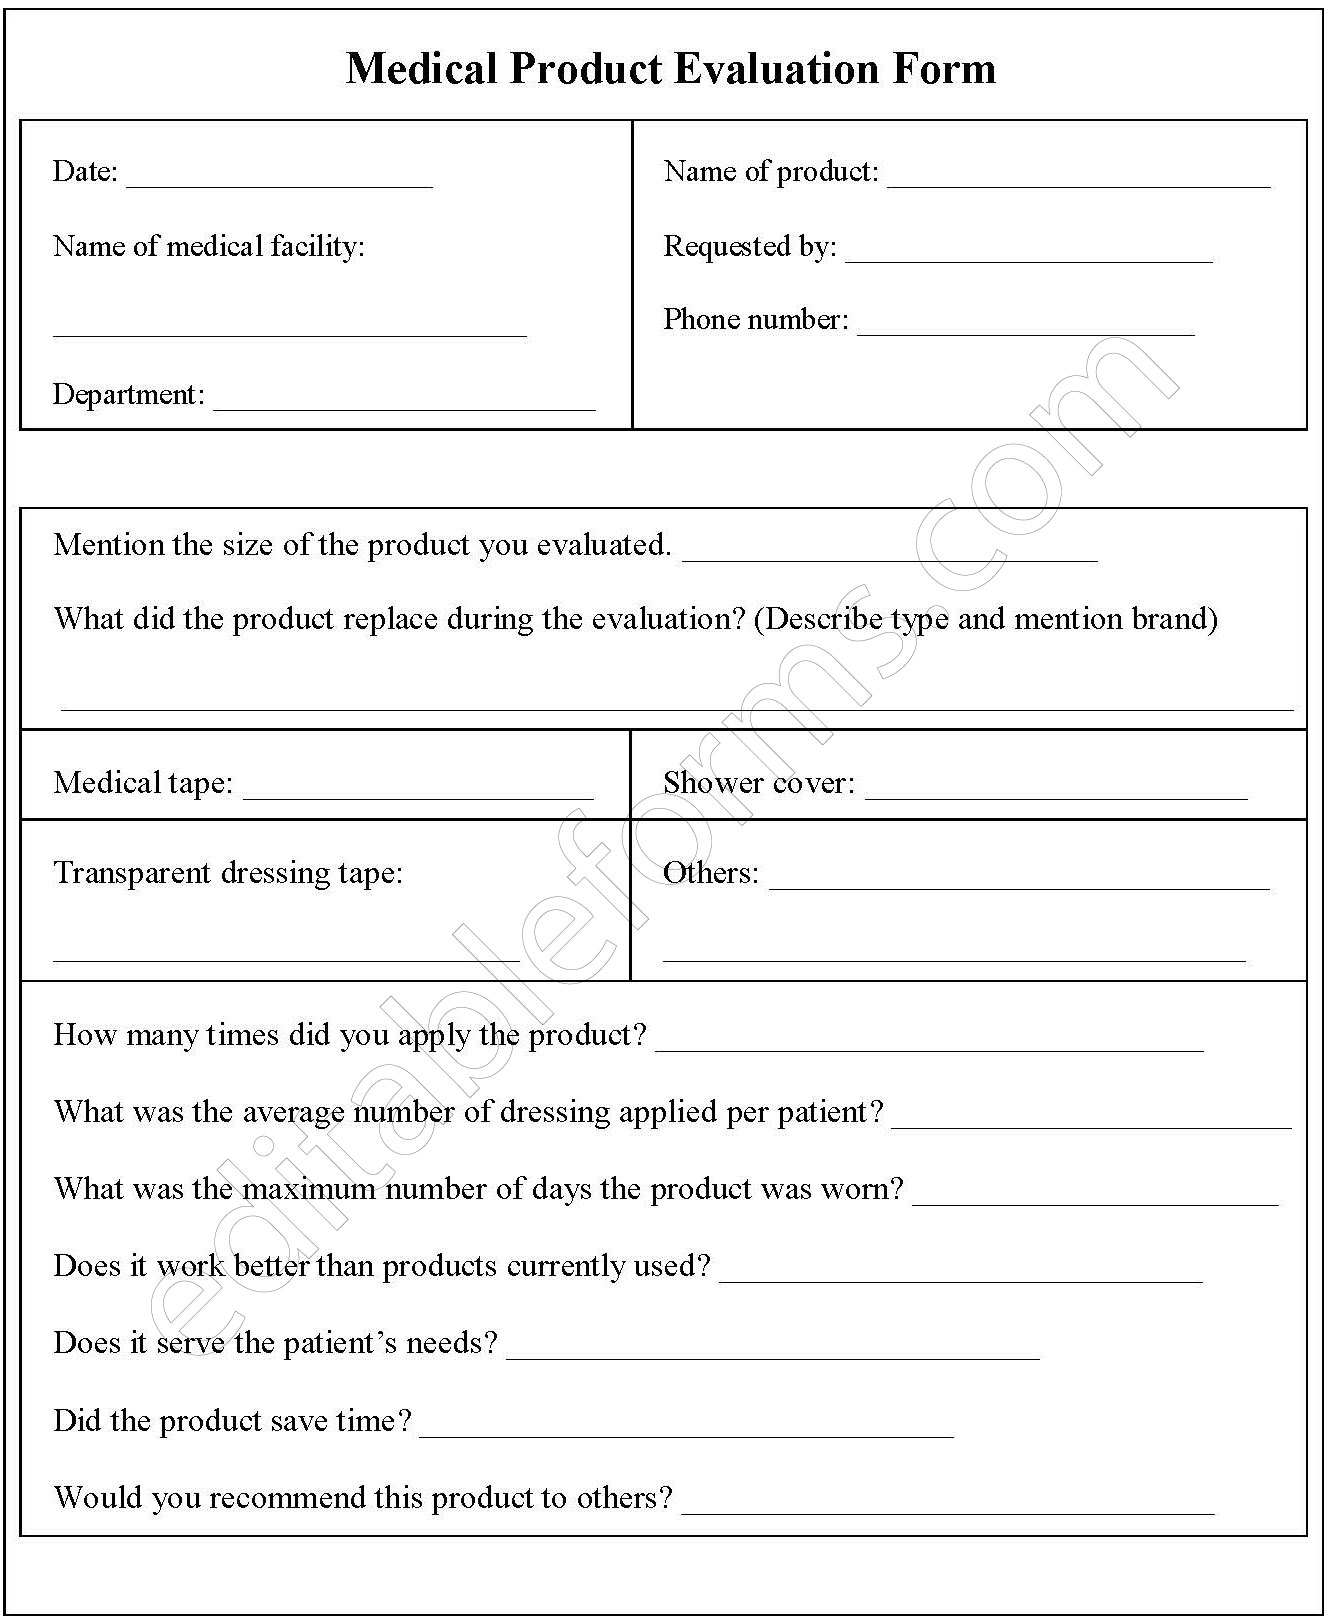 Medical Product Evaluation Fillable PDF Form